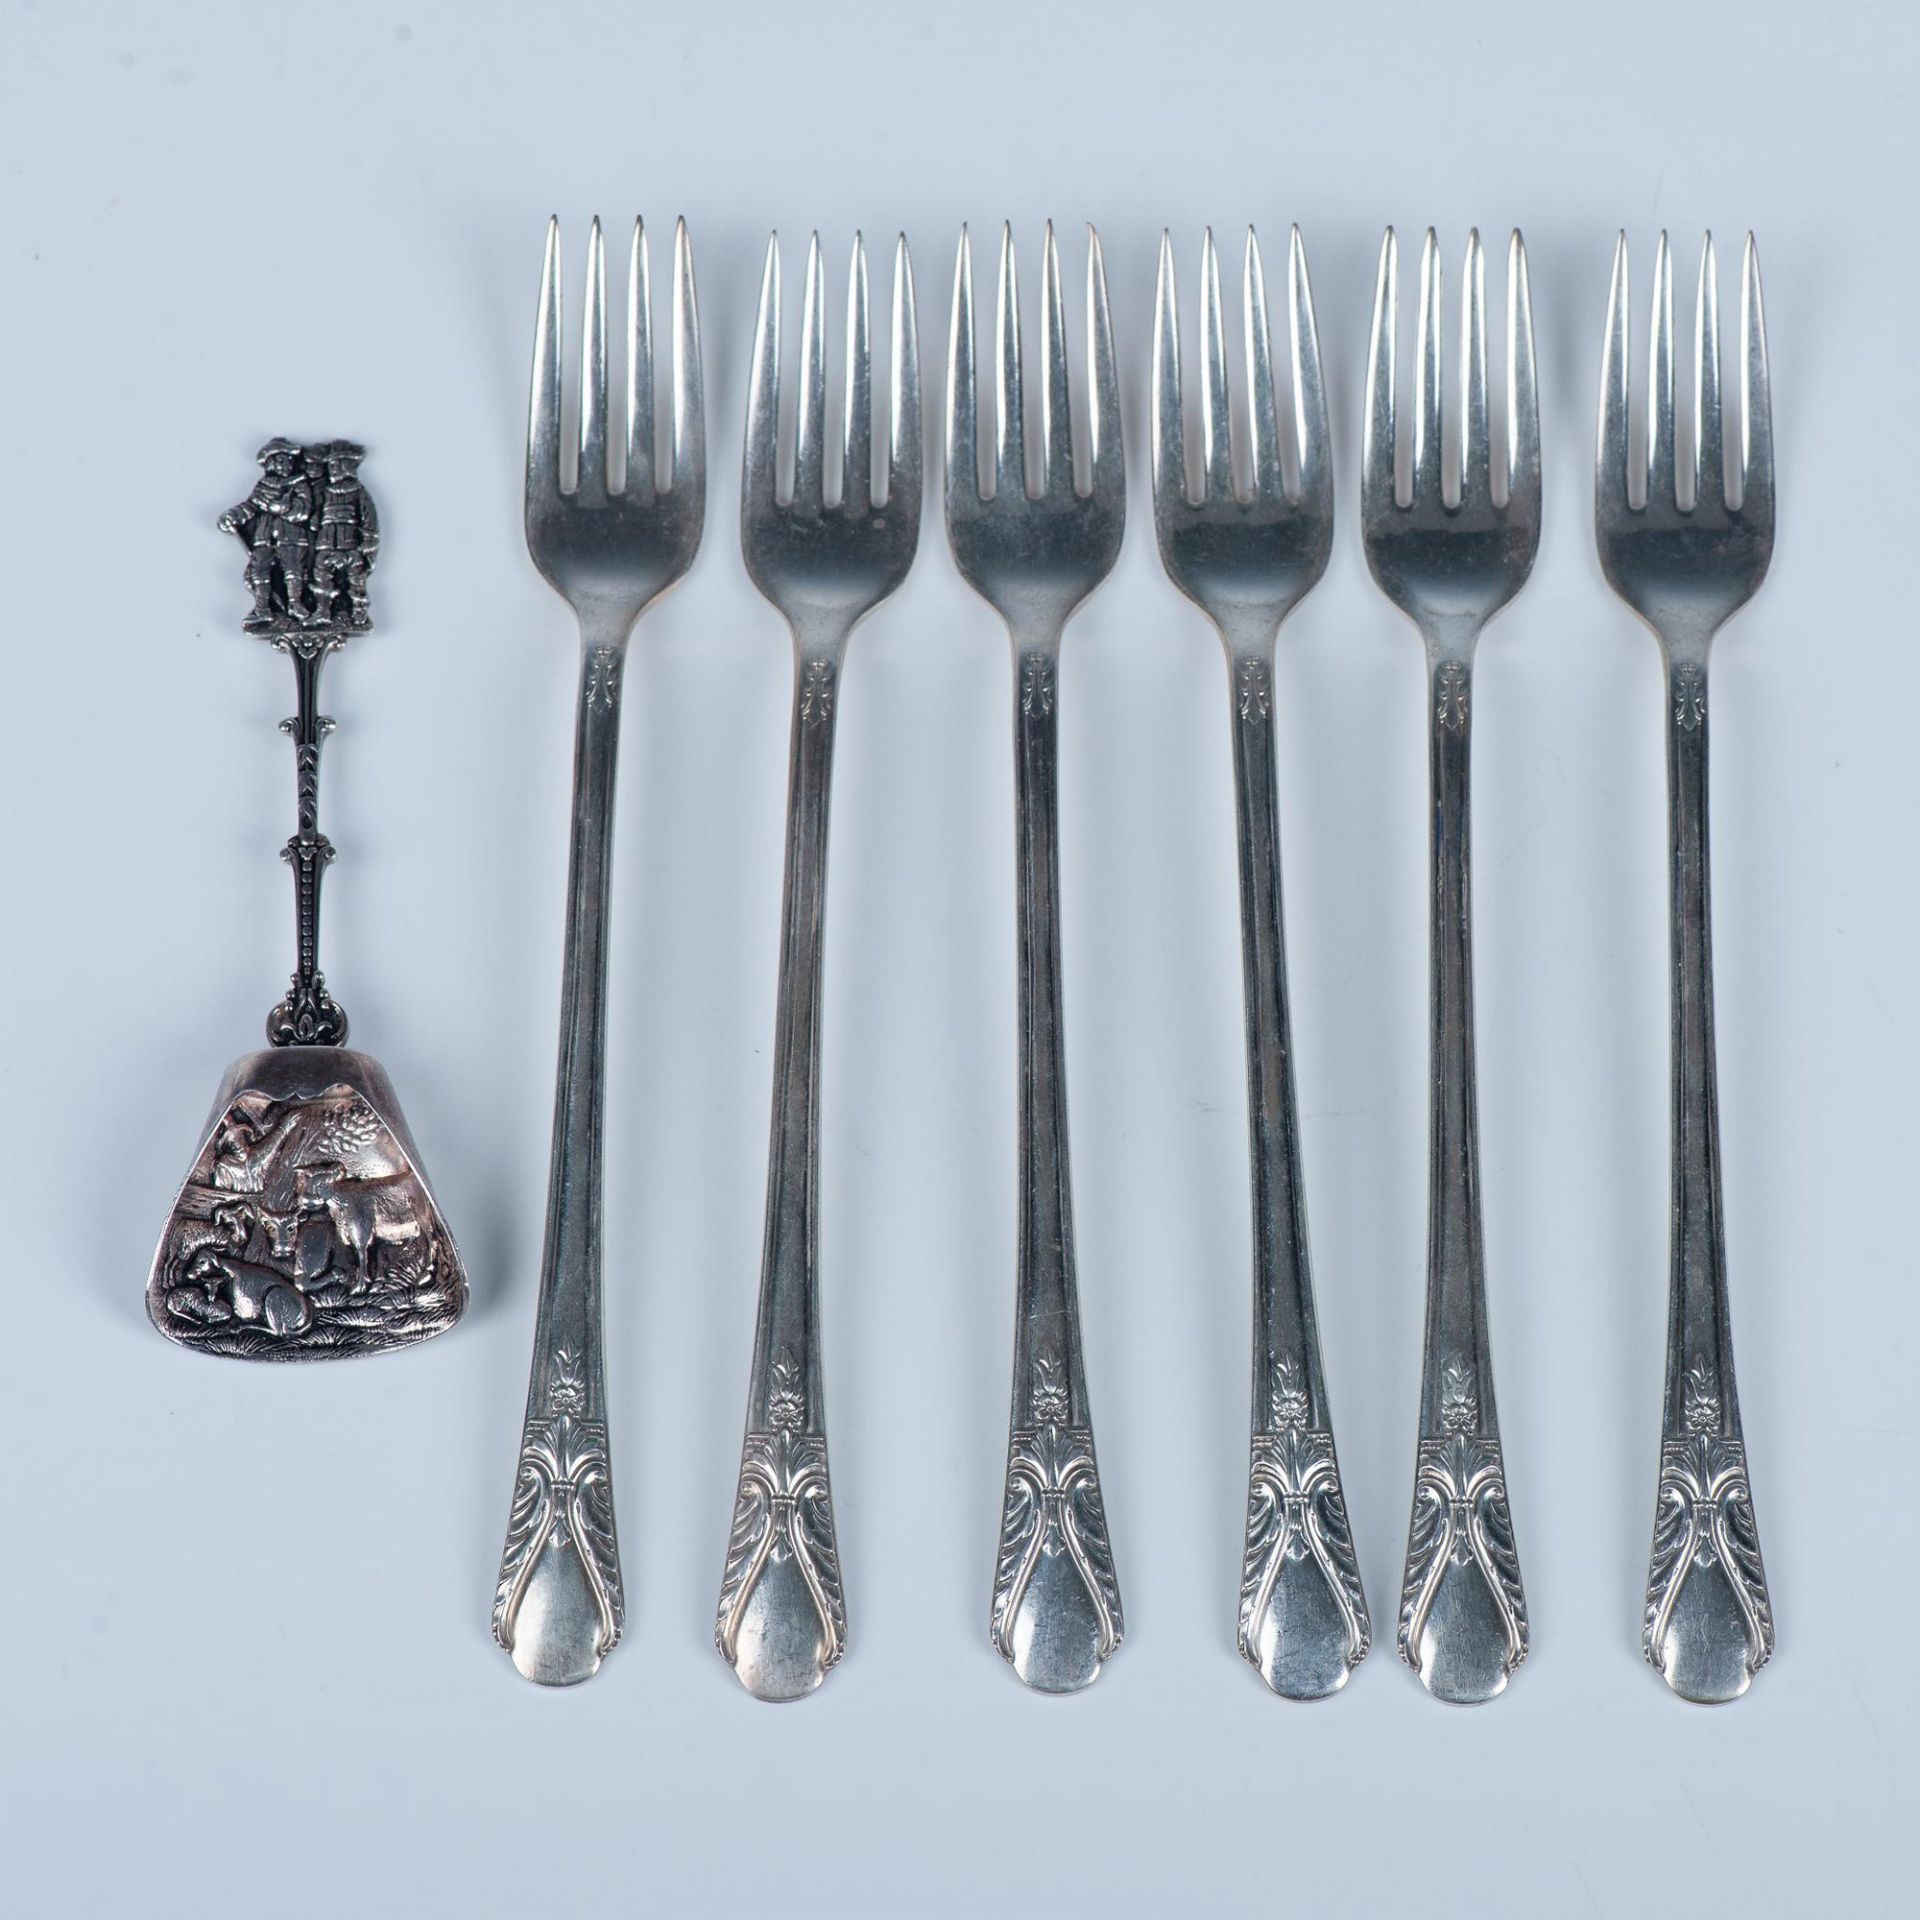 7pc Silverplate Fork and Shovel Spoon Grouping - Image 7 of 7